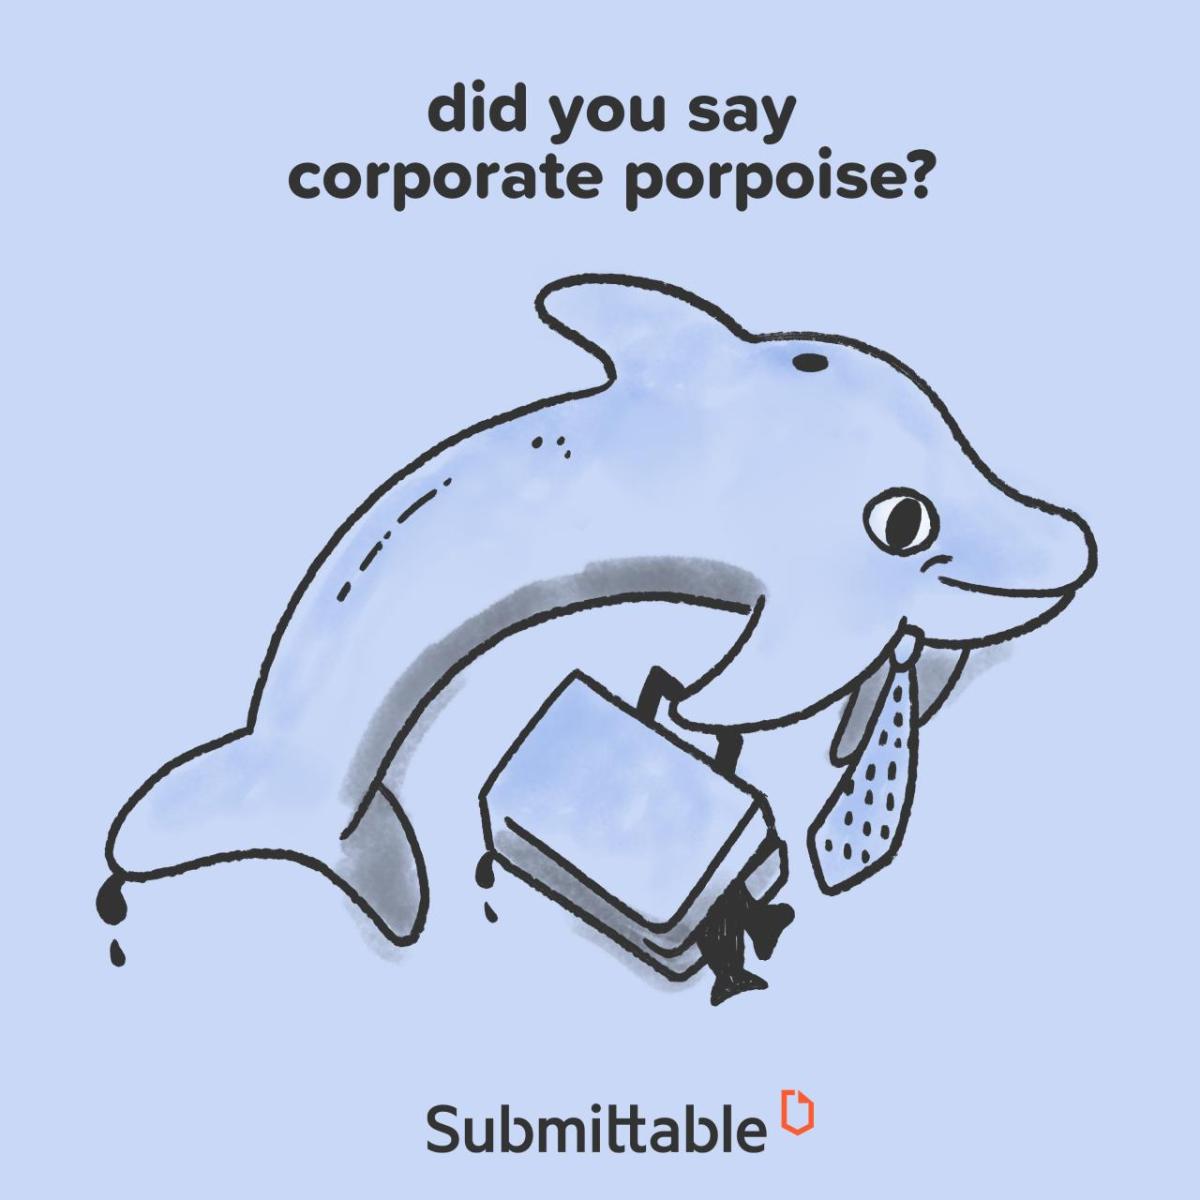 "did you say corporate porpoise?"